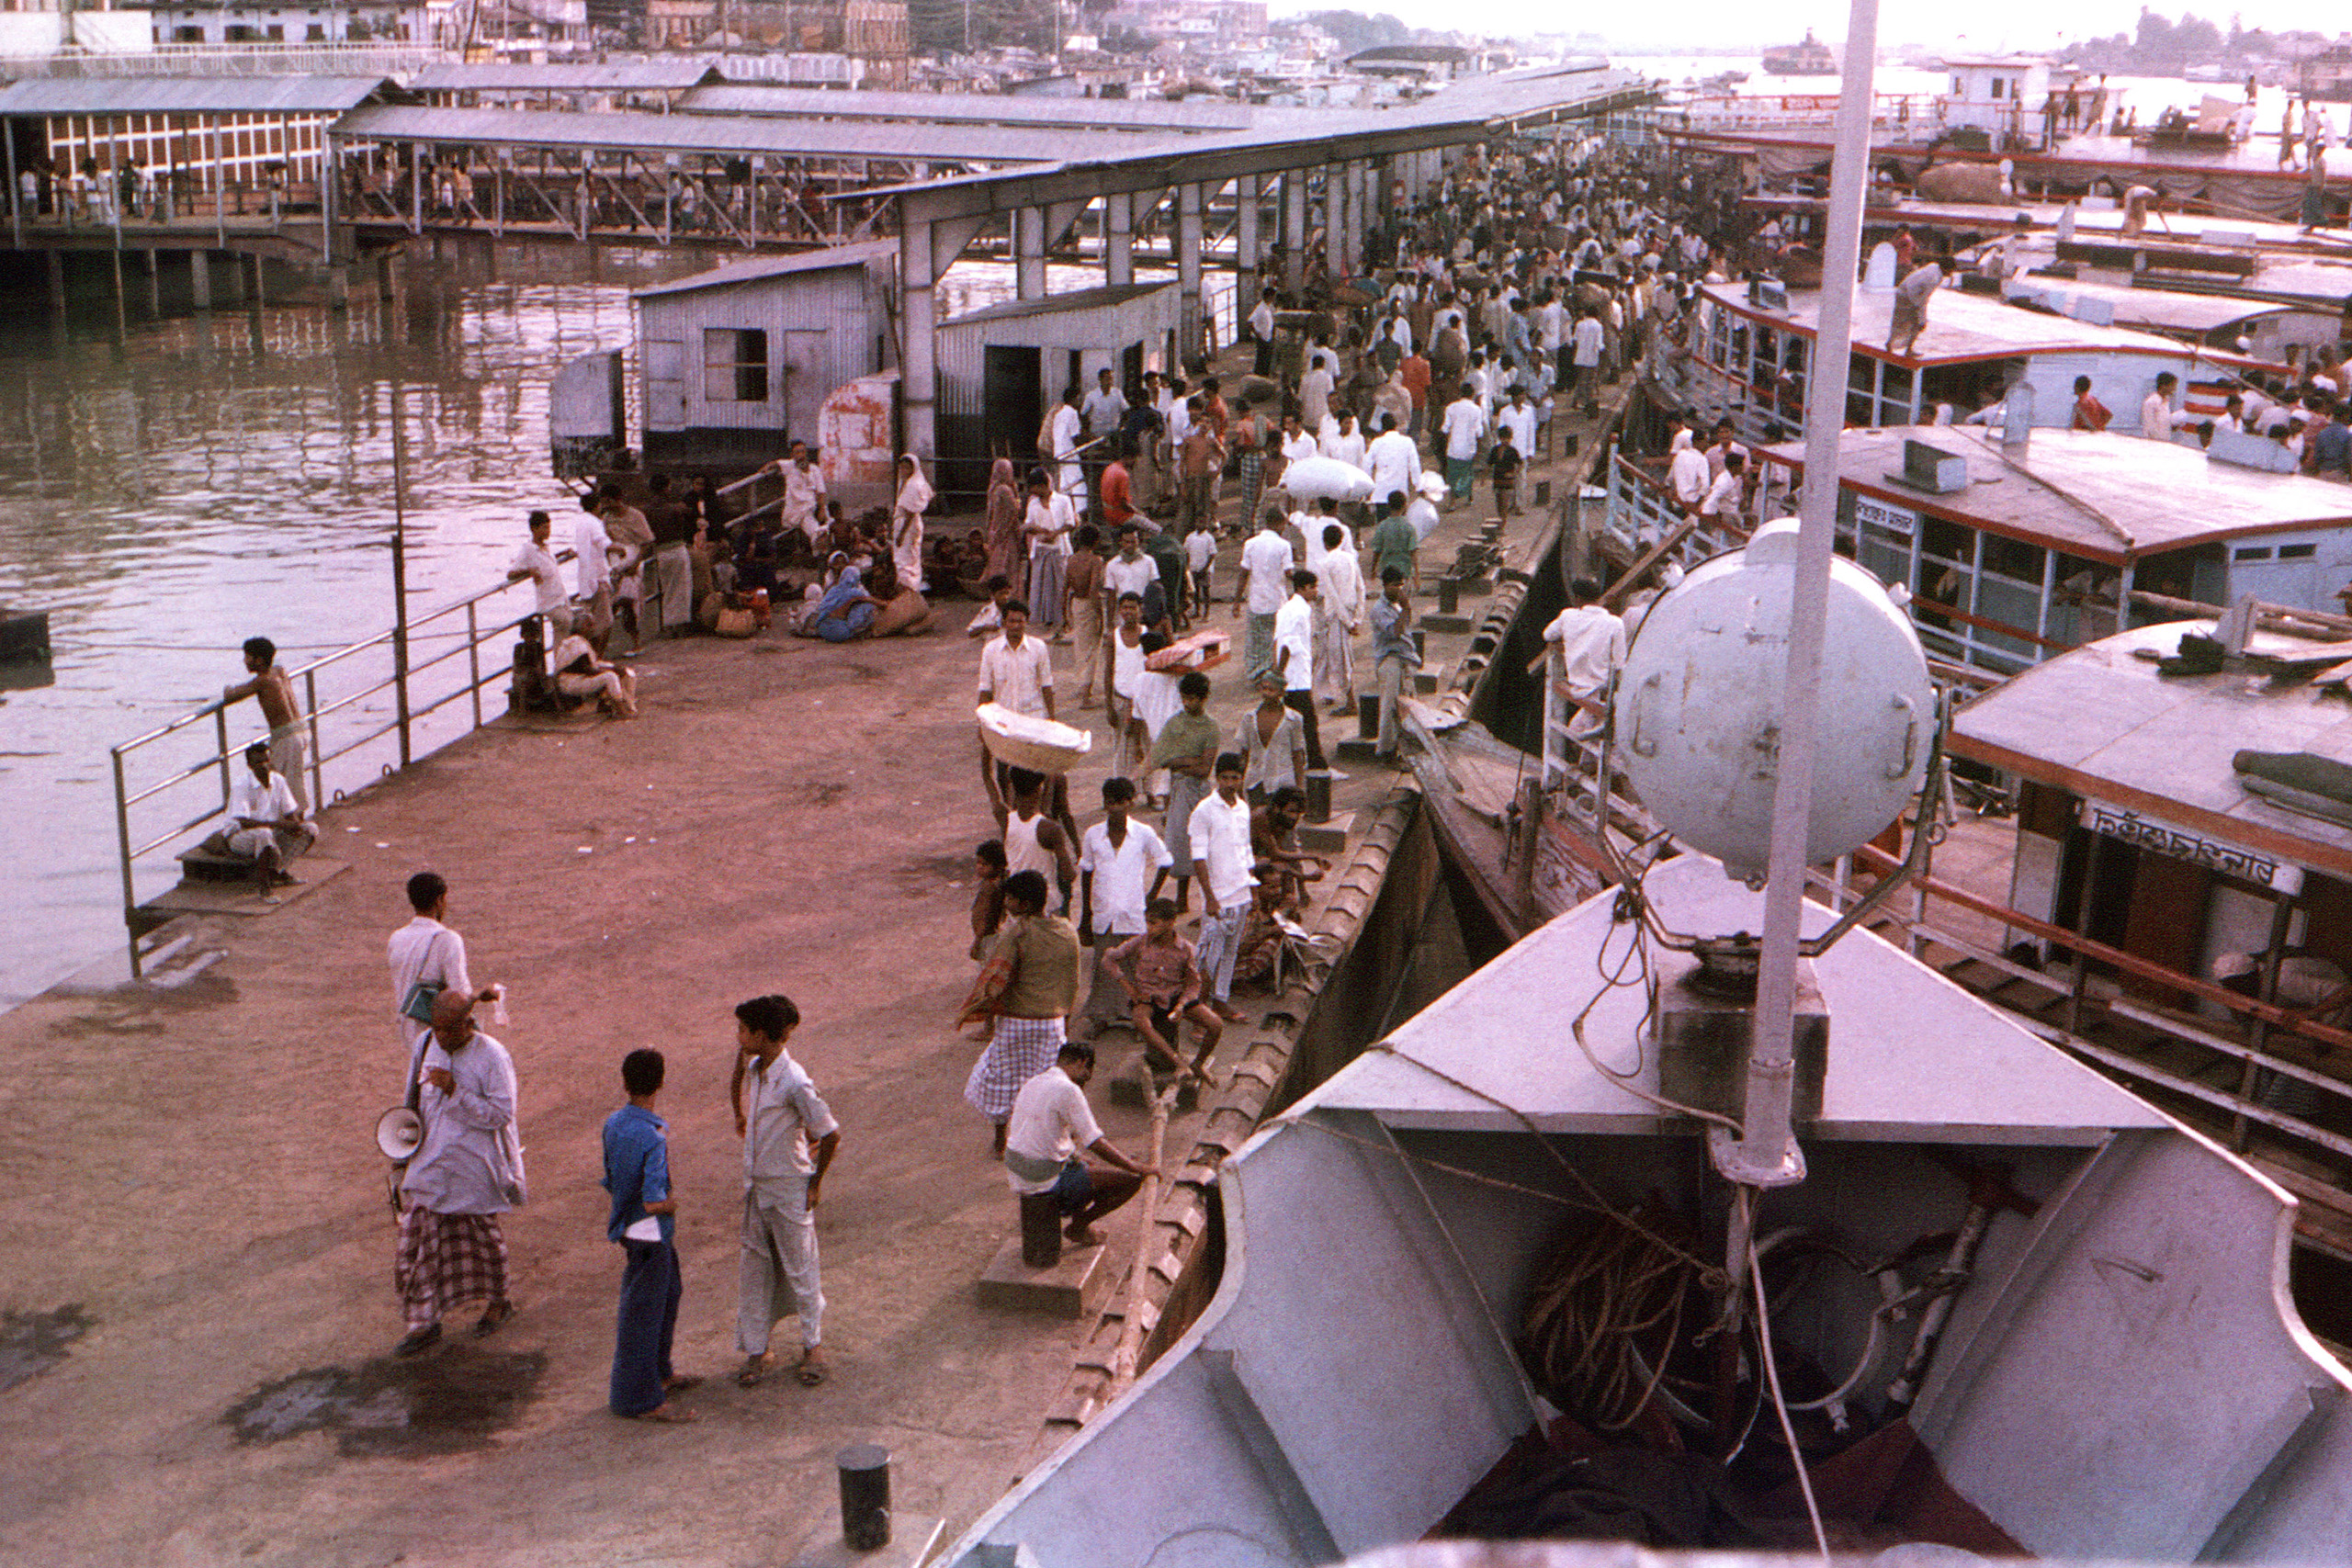 An overhead view of a ferry terminal in Dhaka, Bangladesh, in 1975. A large crowd of people fill the main walkway, flanked by a row of boats on the right.